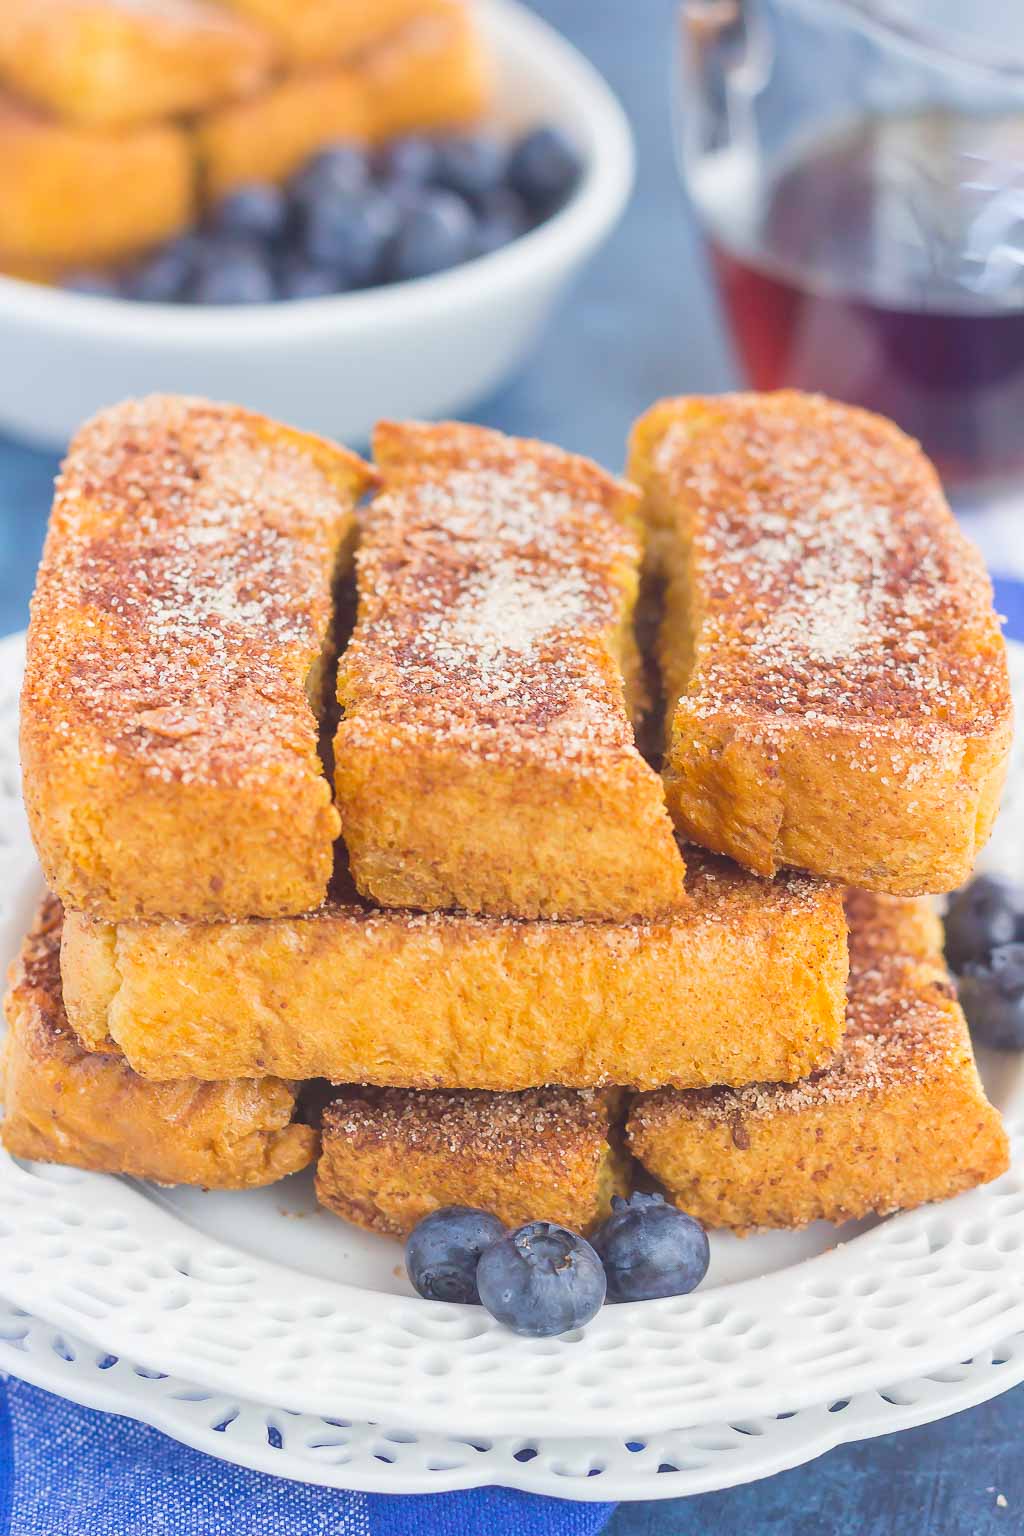 Baked Cinnamon Sugar French Toast Sticks make an easy breakfast that's loaded with flavor. Simple to prepare and baked in the oven, you can have these sticks ready to serve in no time, with a side of syrup for dunking!